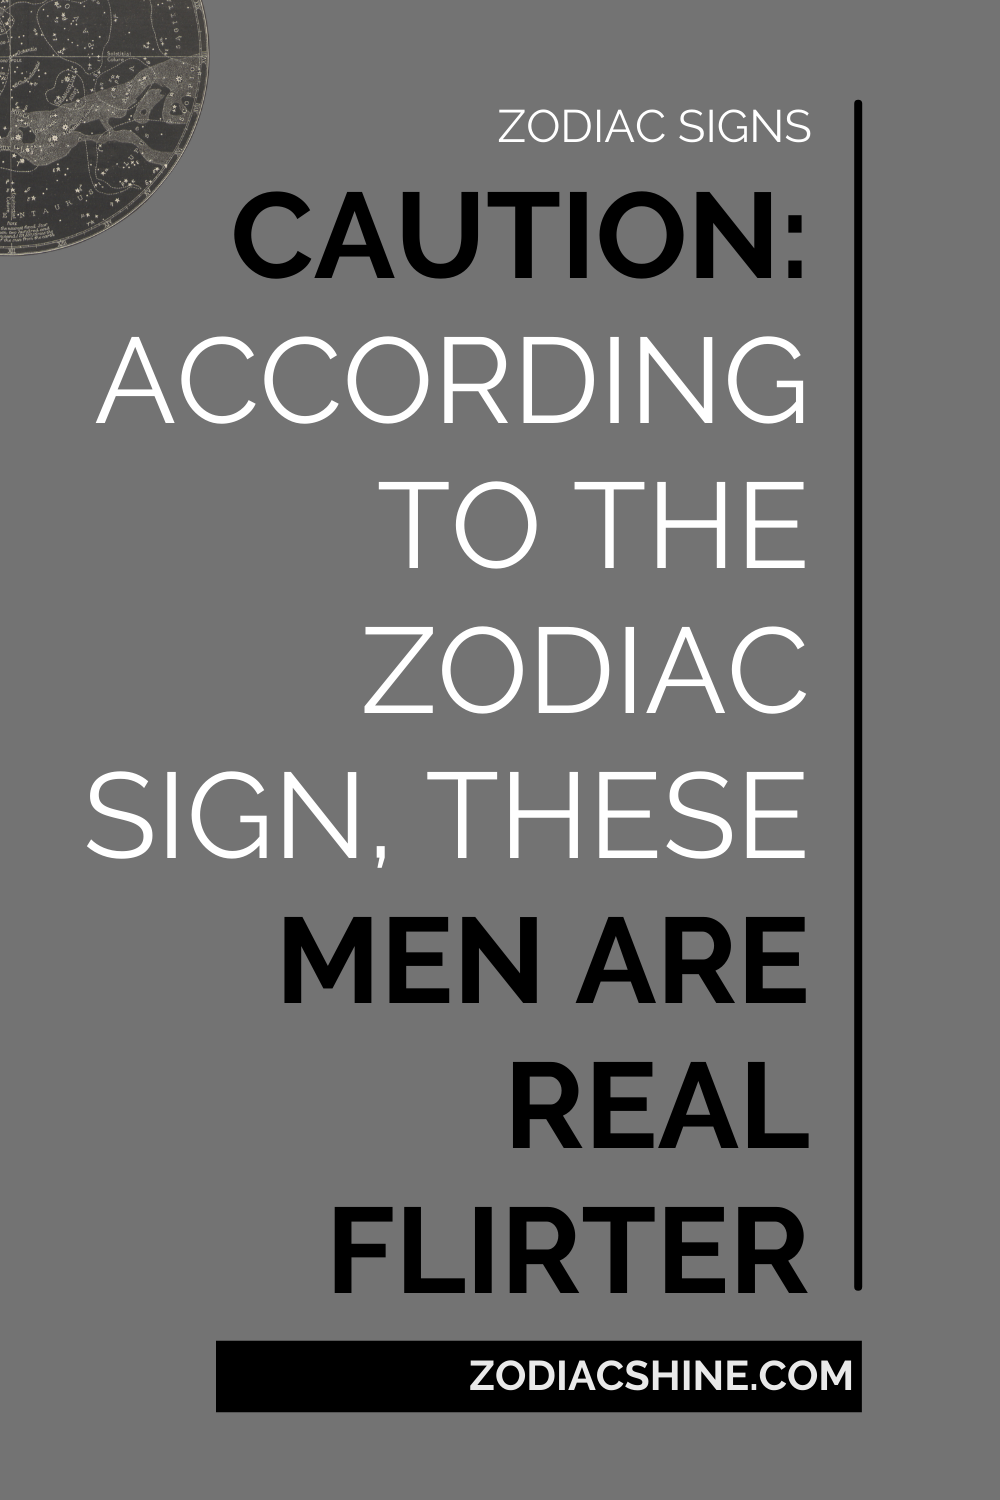 Caution: According To The Zodiac Sign These Men Are Real Flirter